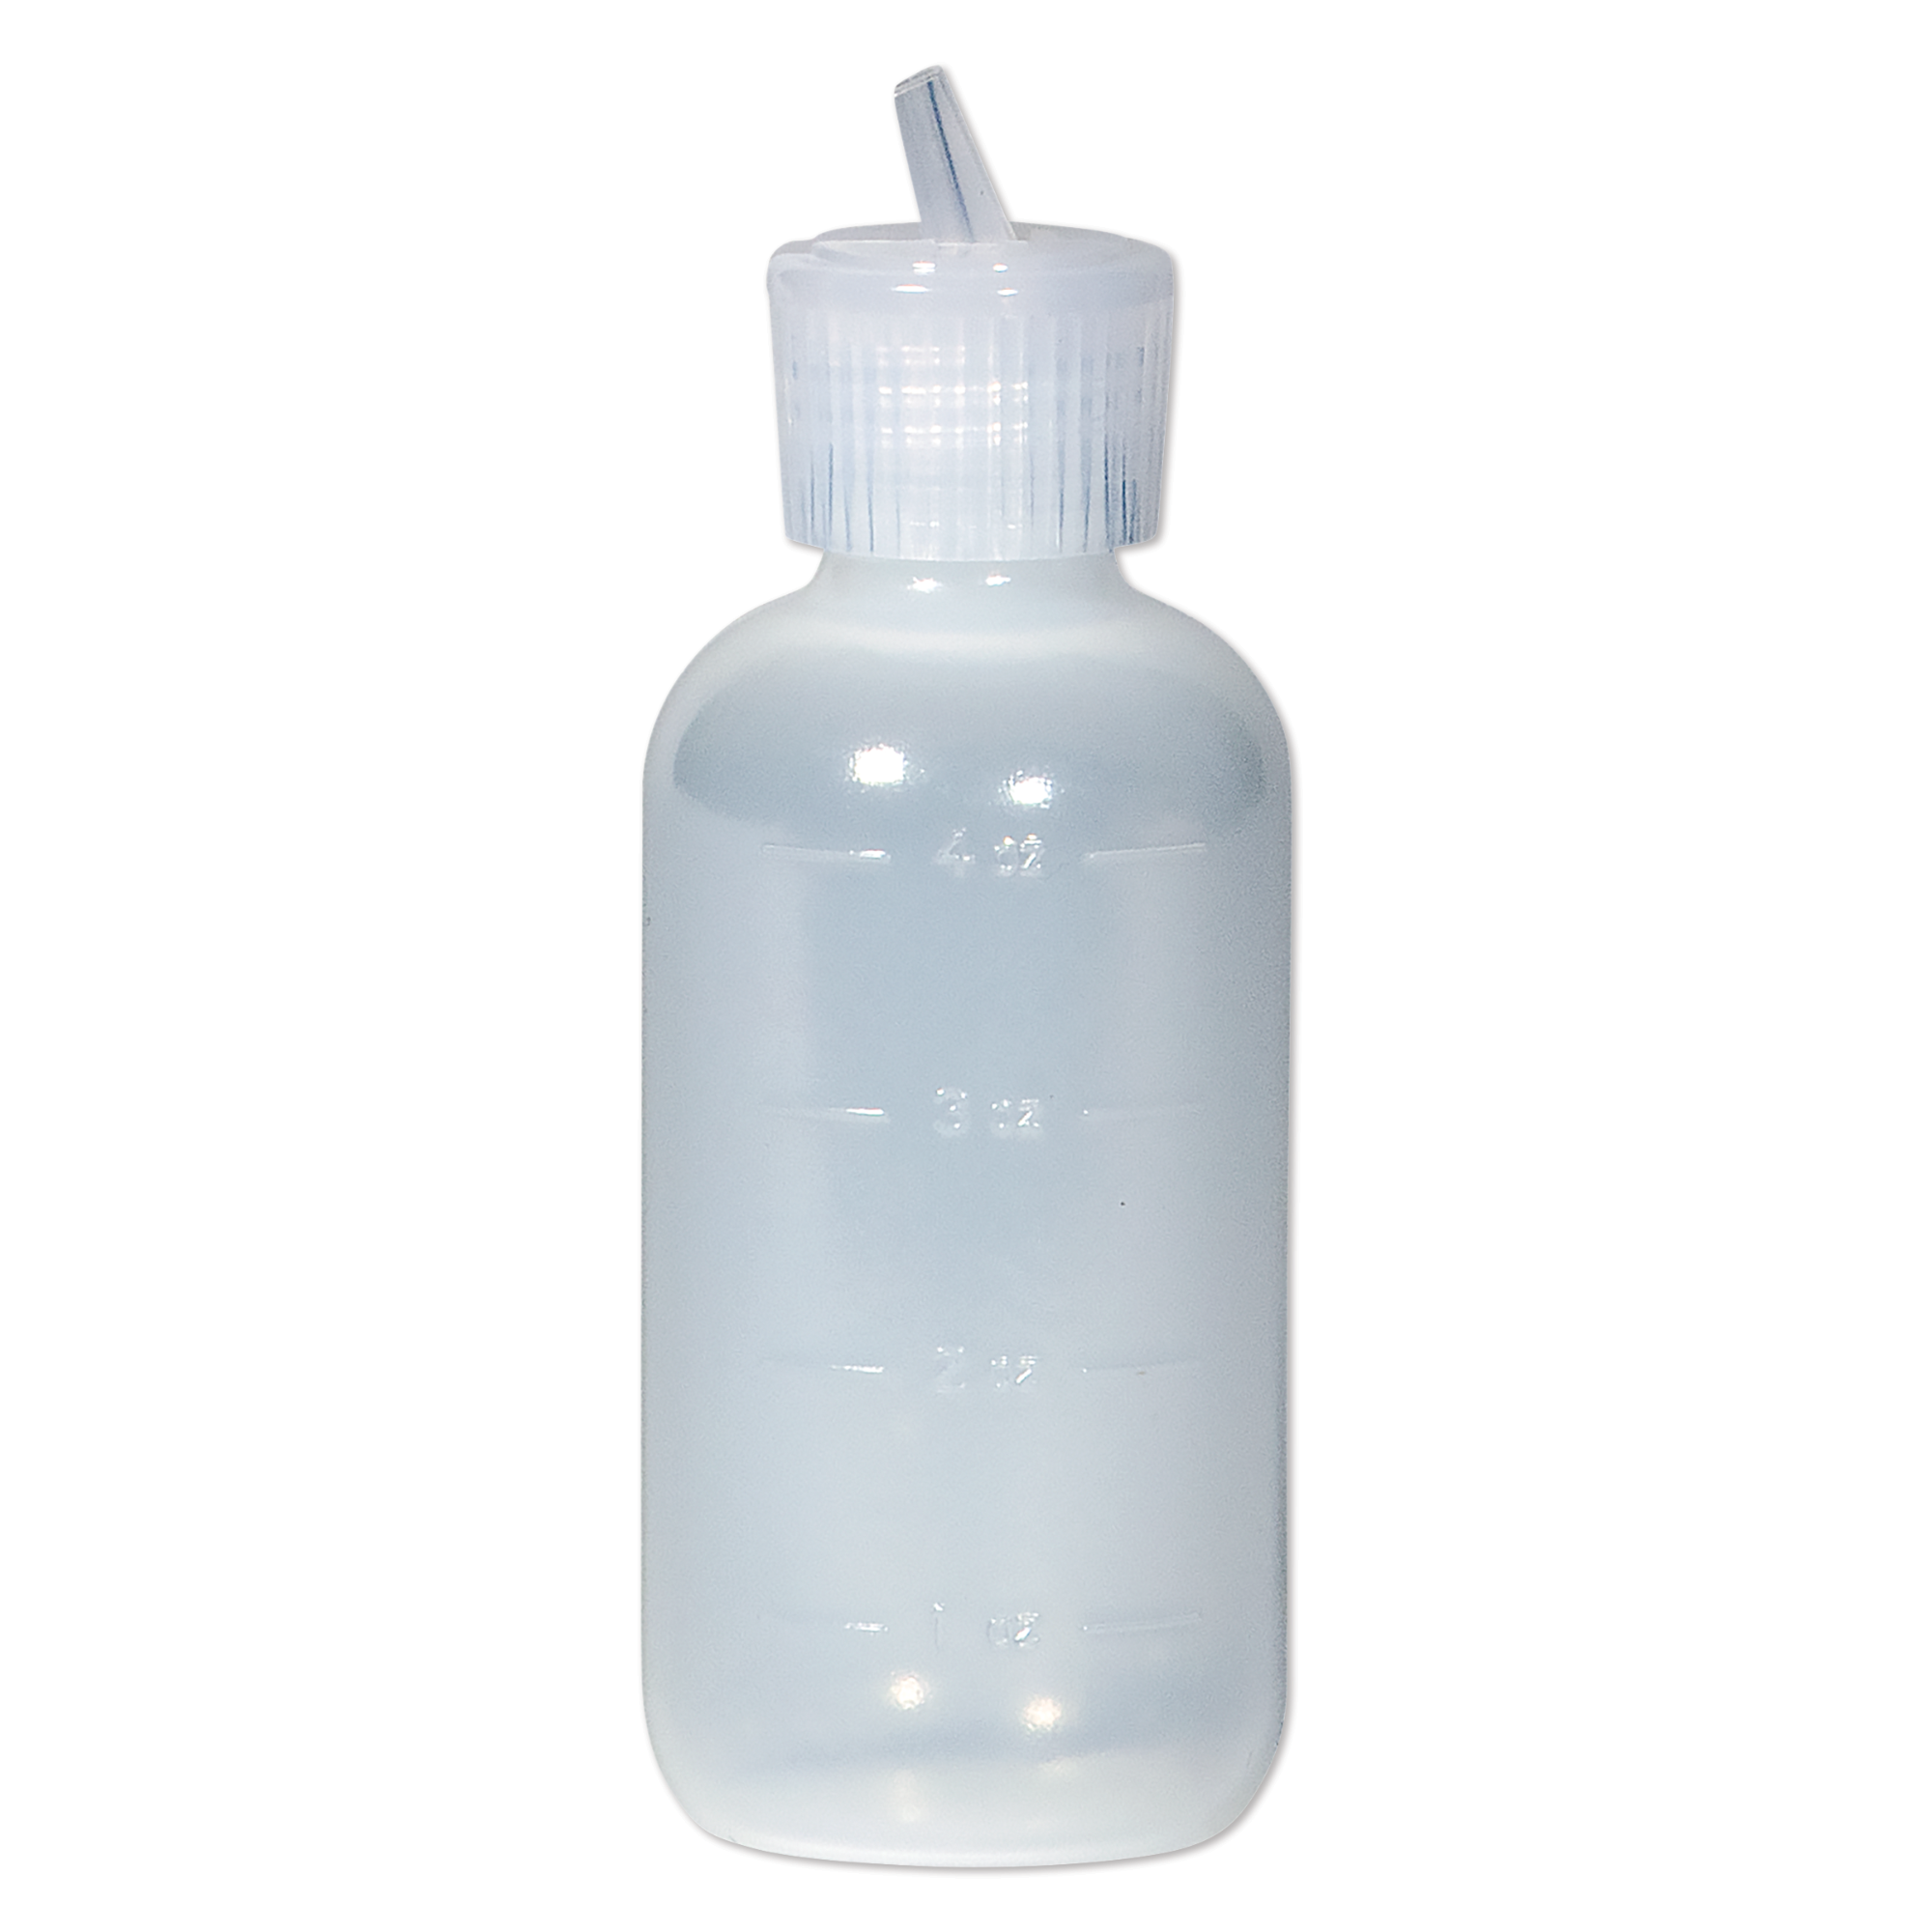 Flip-Top Bottle with Measuring Scales, 4 oz.